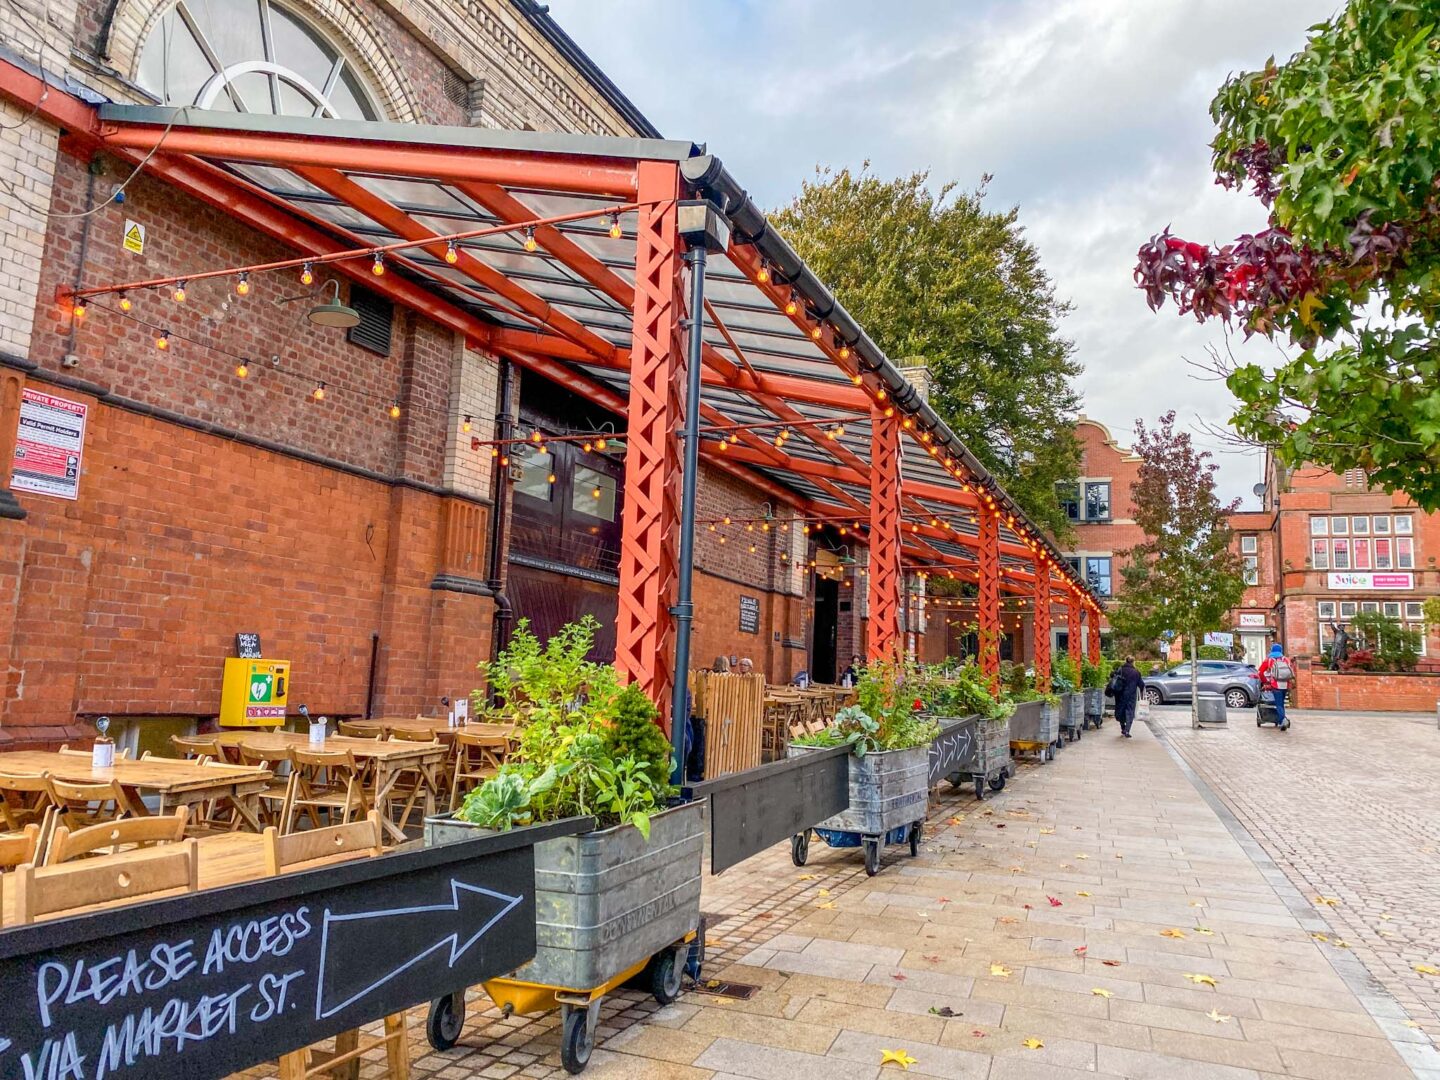 Things to do in Altrincham, outside Altrincham food market